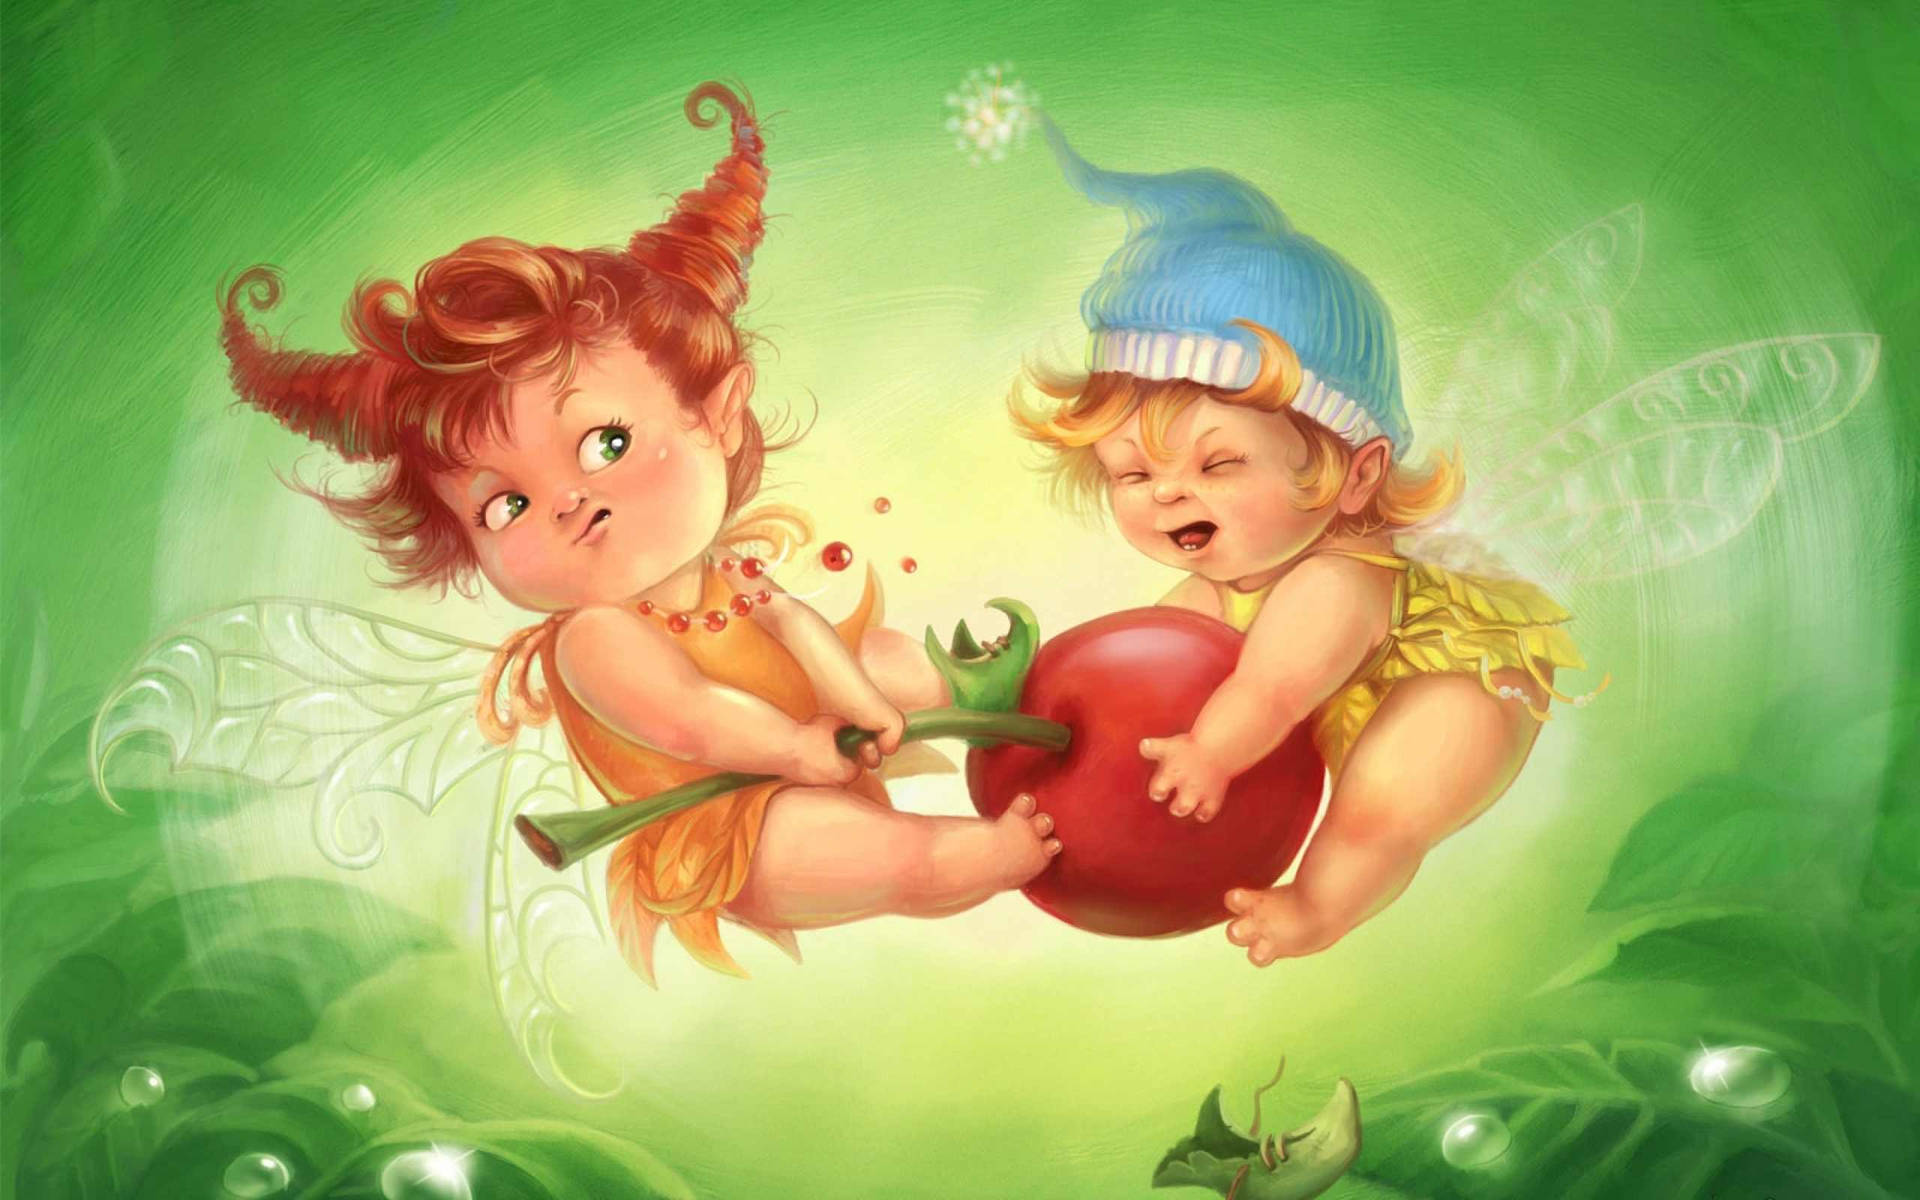 Two baby fairies image wallpaper.